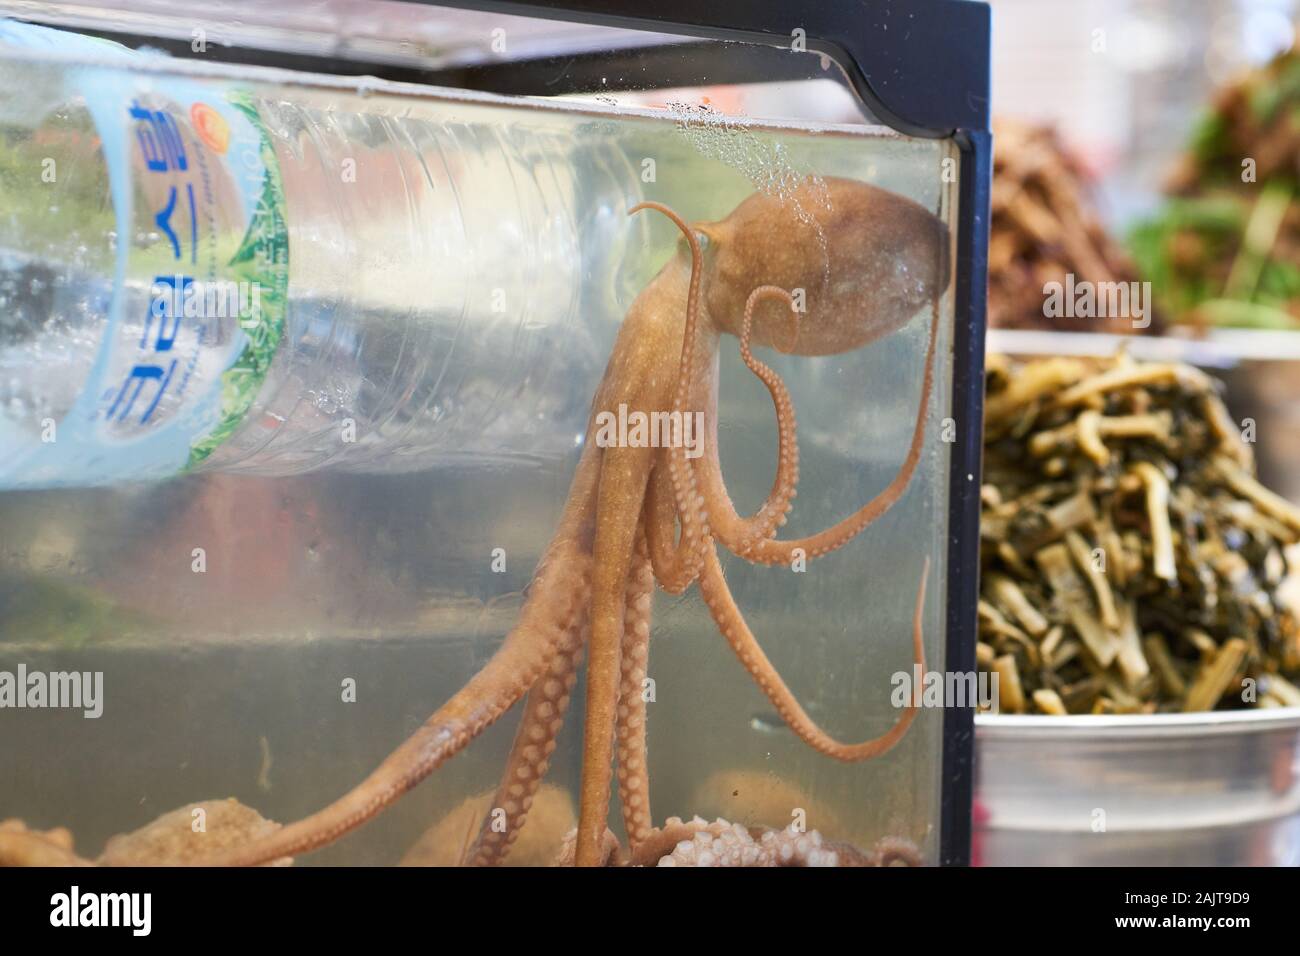 The common octopus, Octopus Vulgaris, in a small aquarium at the Gwangjang Market in Seoul, South Korea, waiting to be turned into a meal. Stock Photo